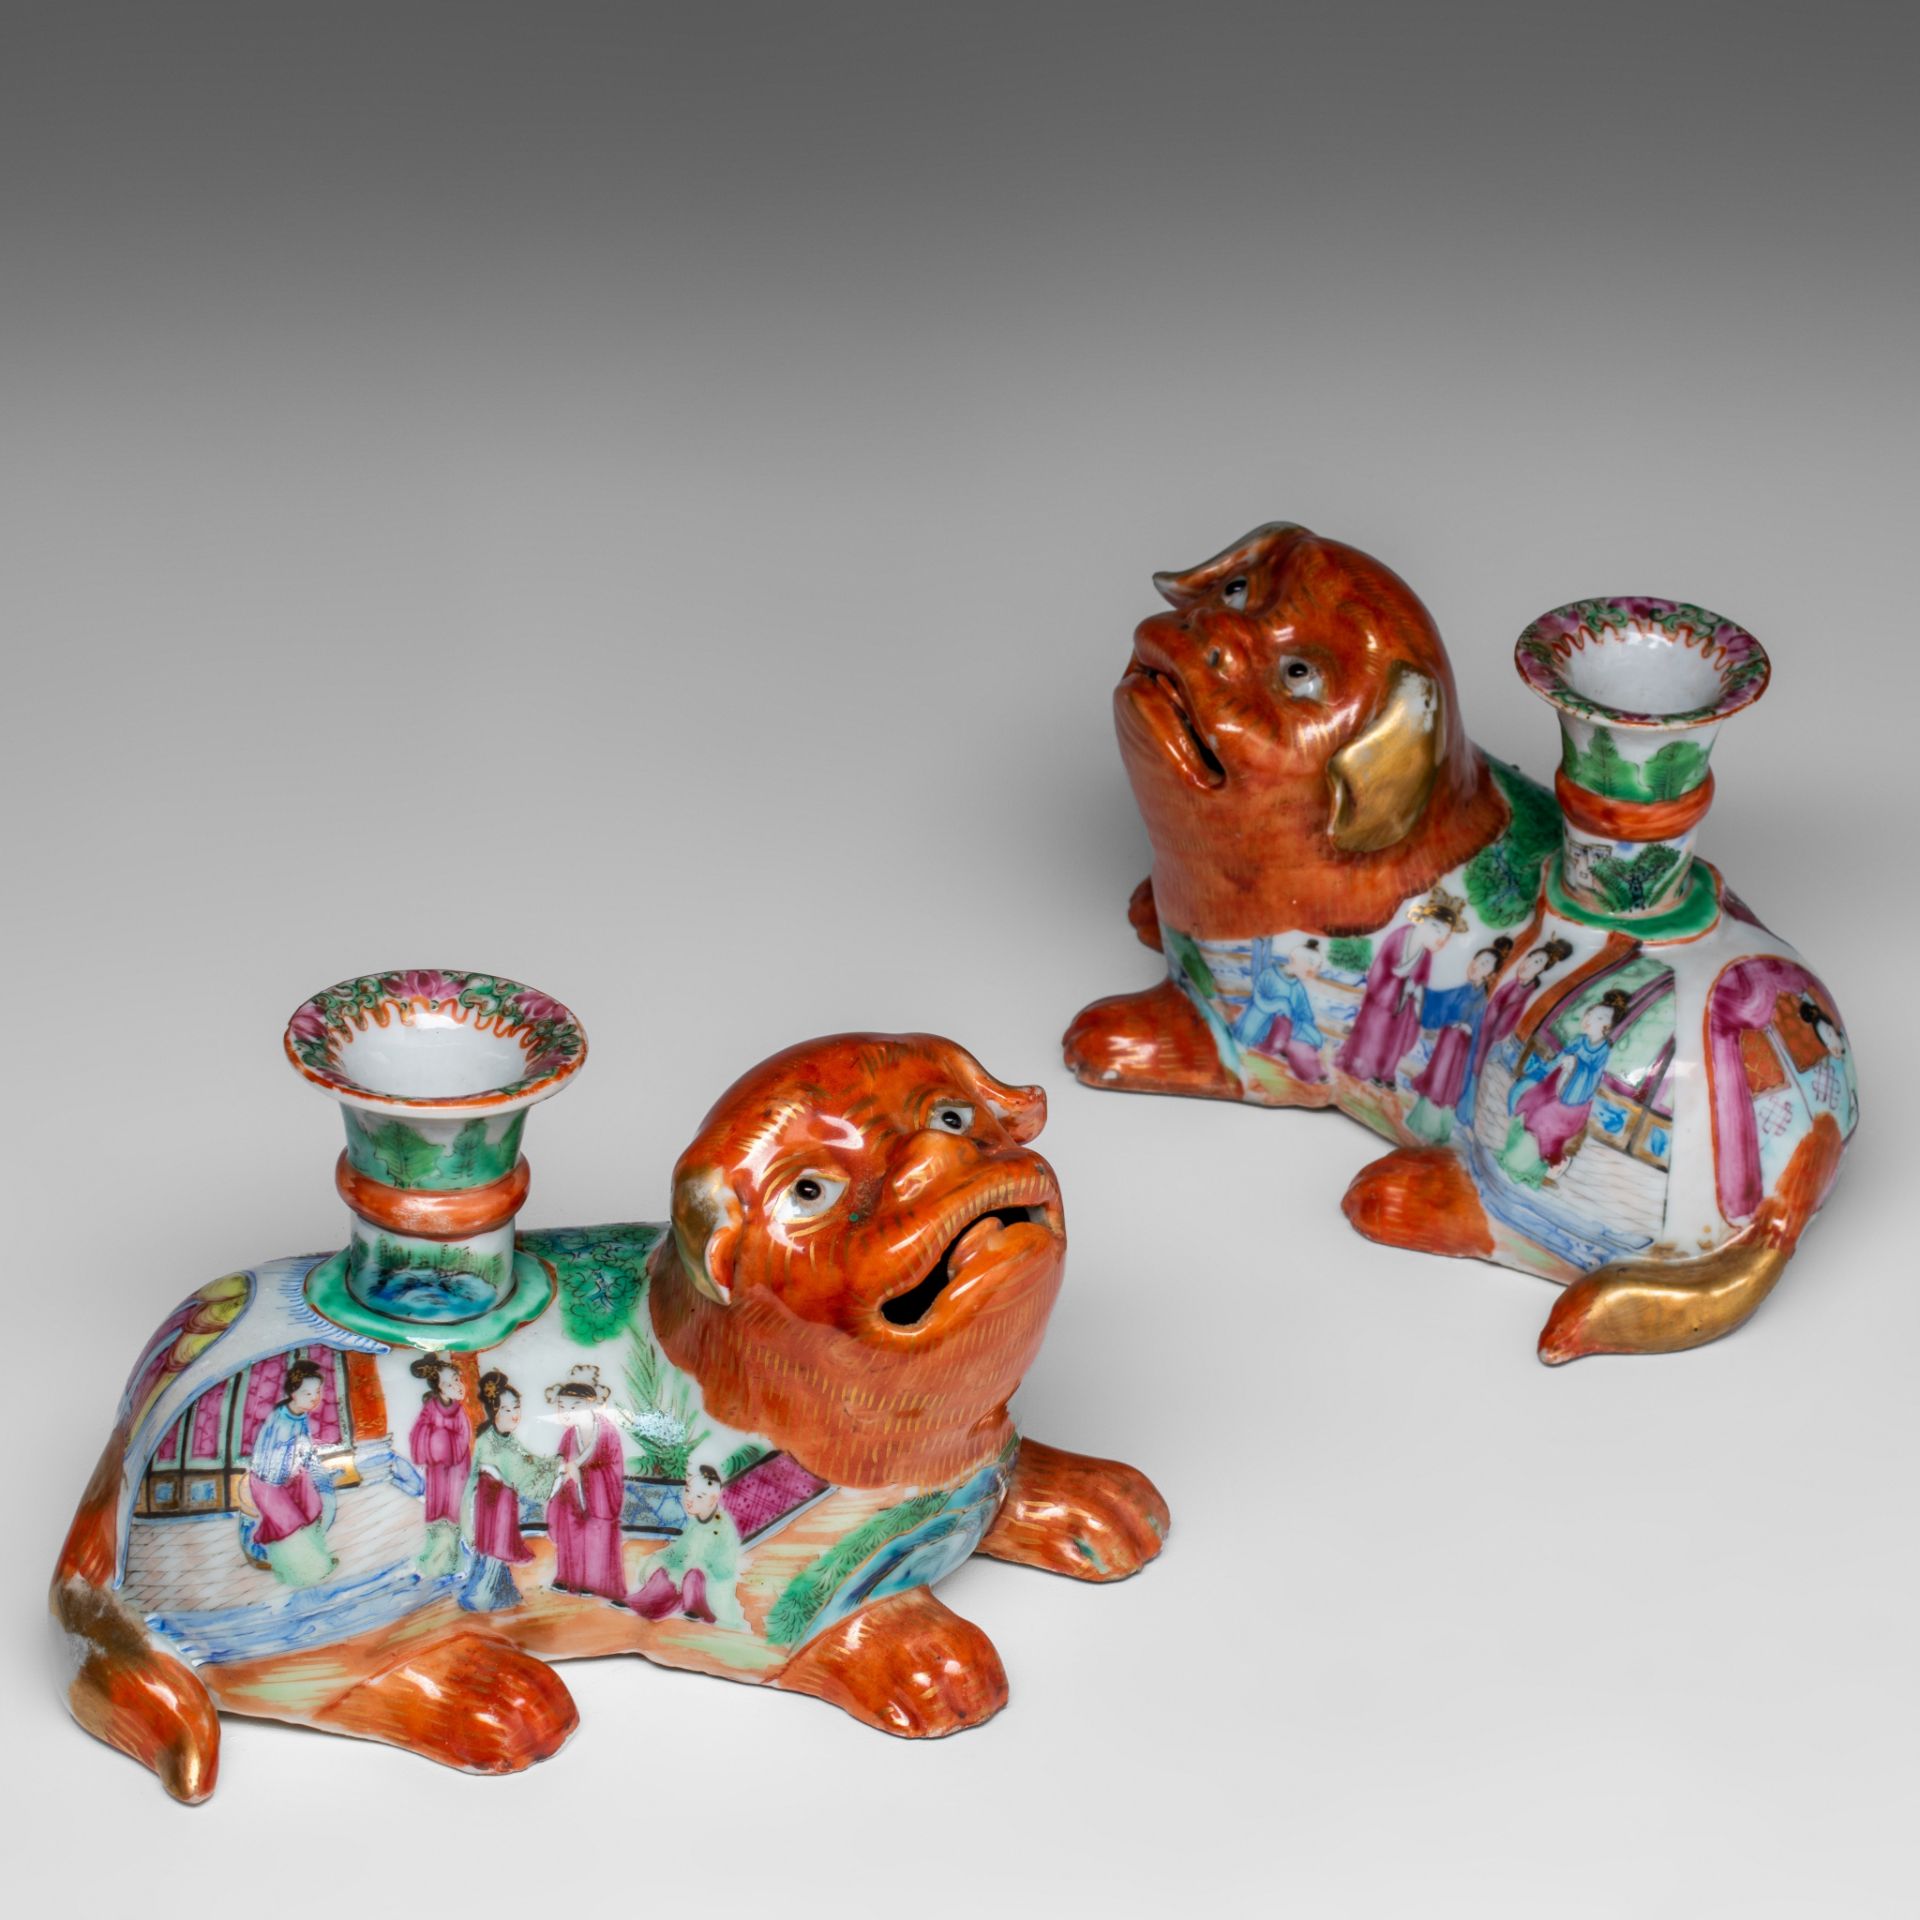 A fine pair of Chinese Canton joss stick holders in the shape of Fu dogs, 19thC, H 11,5 - L 20 cm - Image 9 of 9